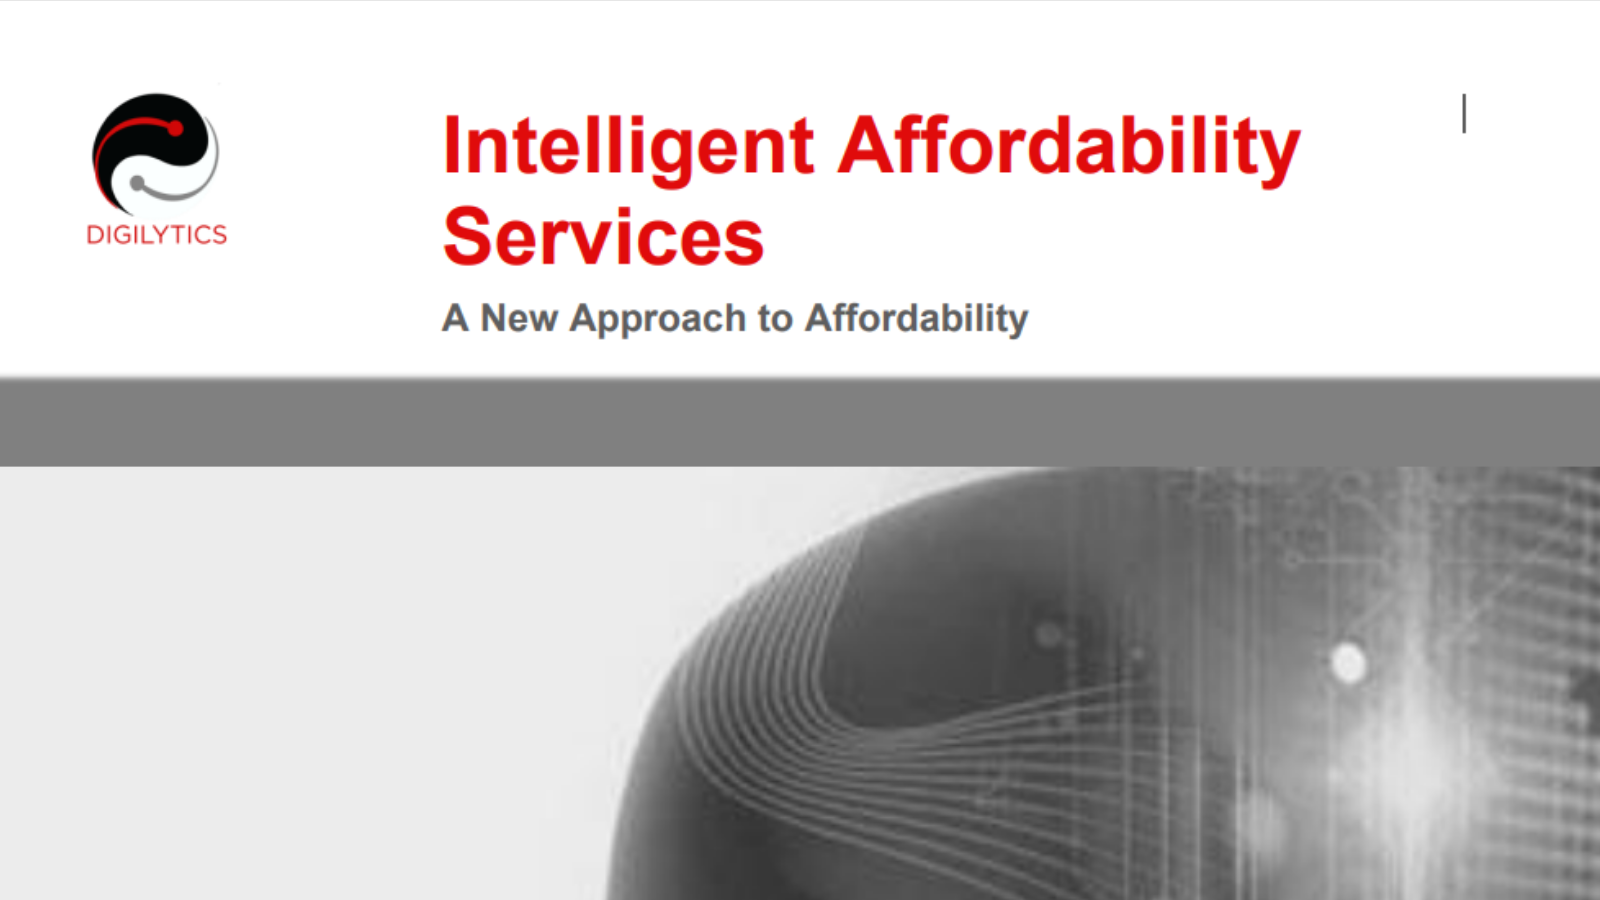 The Intelligent Affordability Service